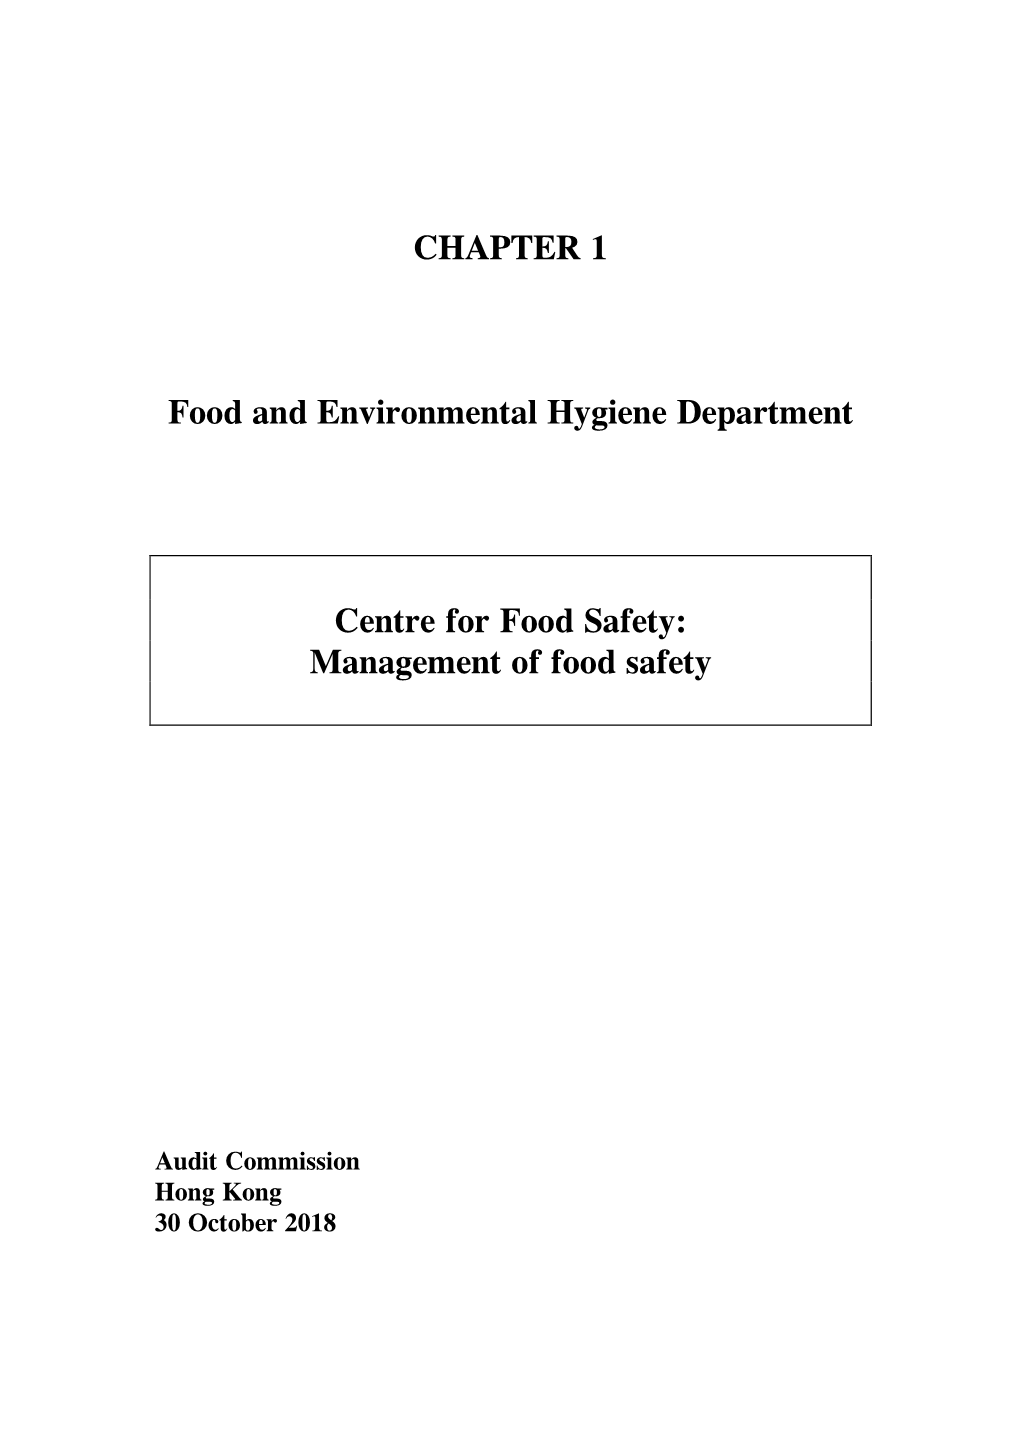 Management of Food Safety